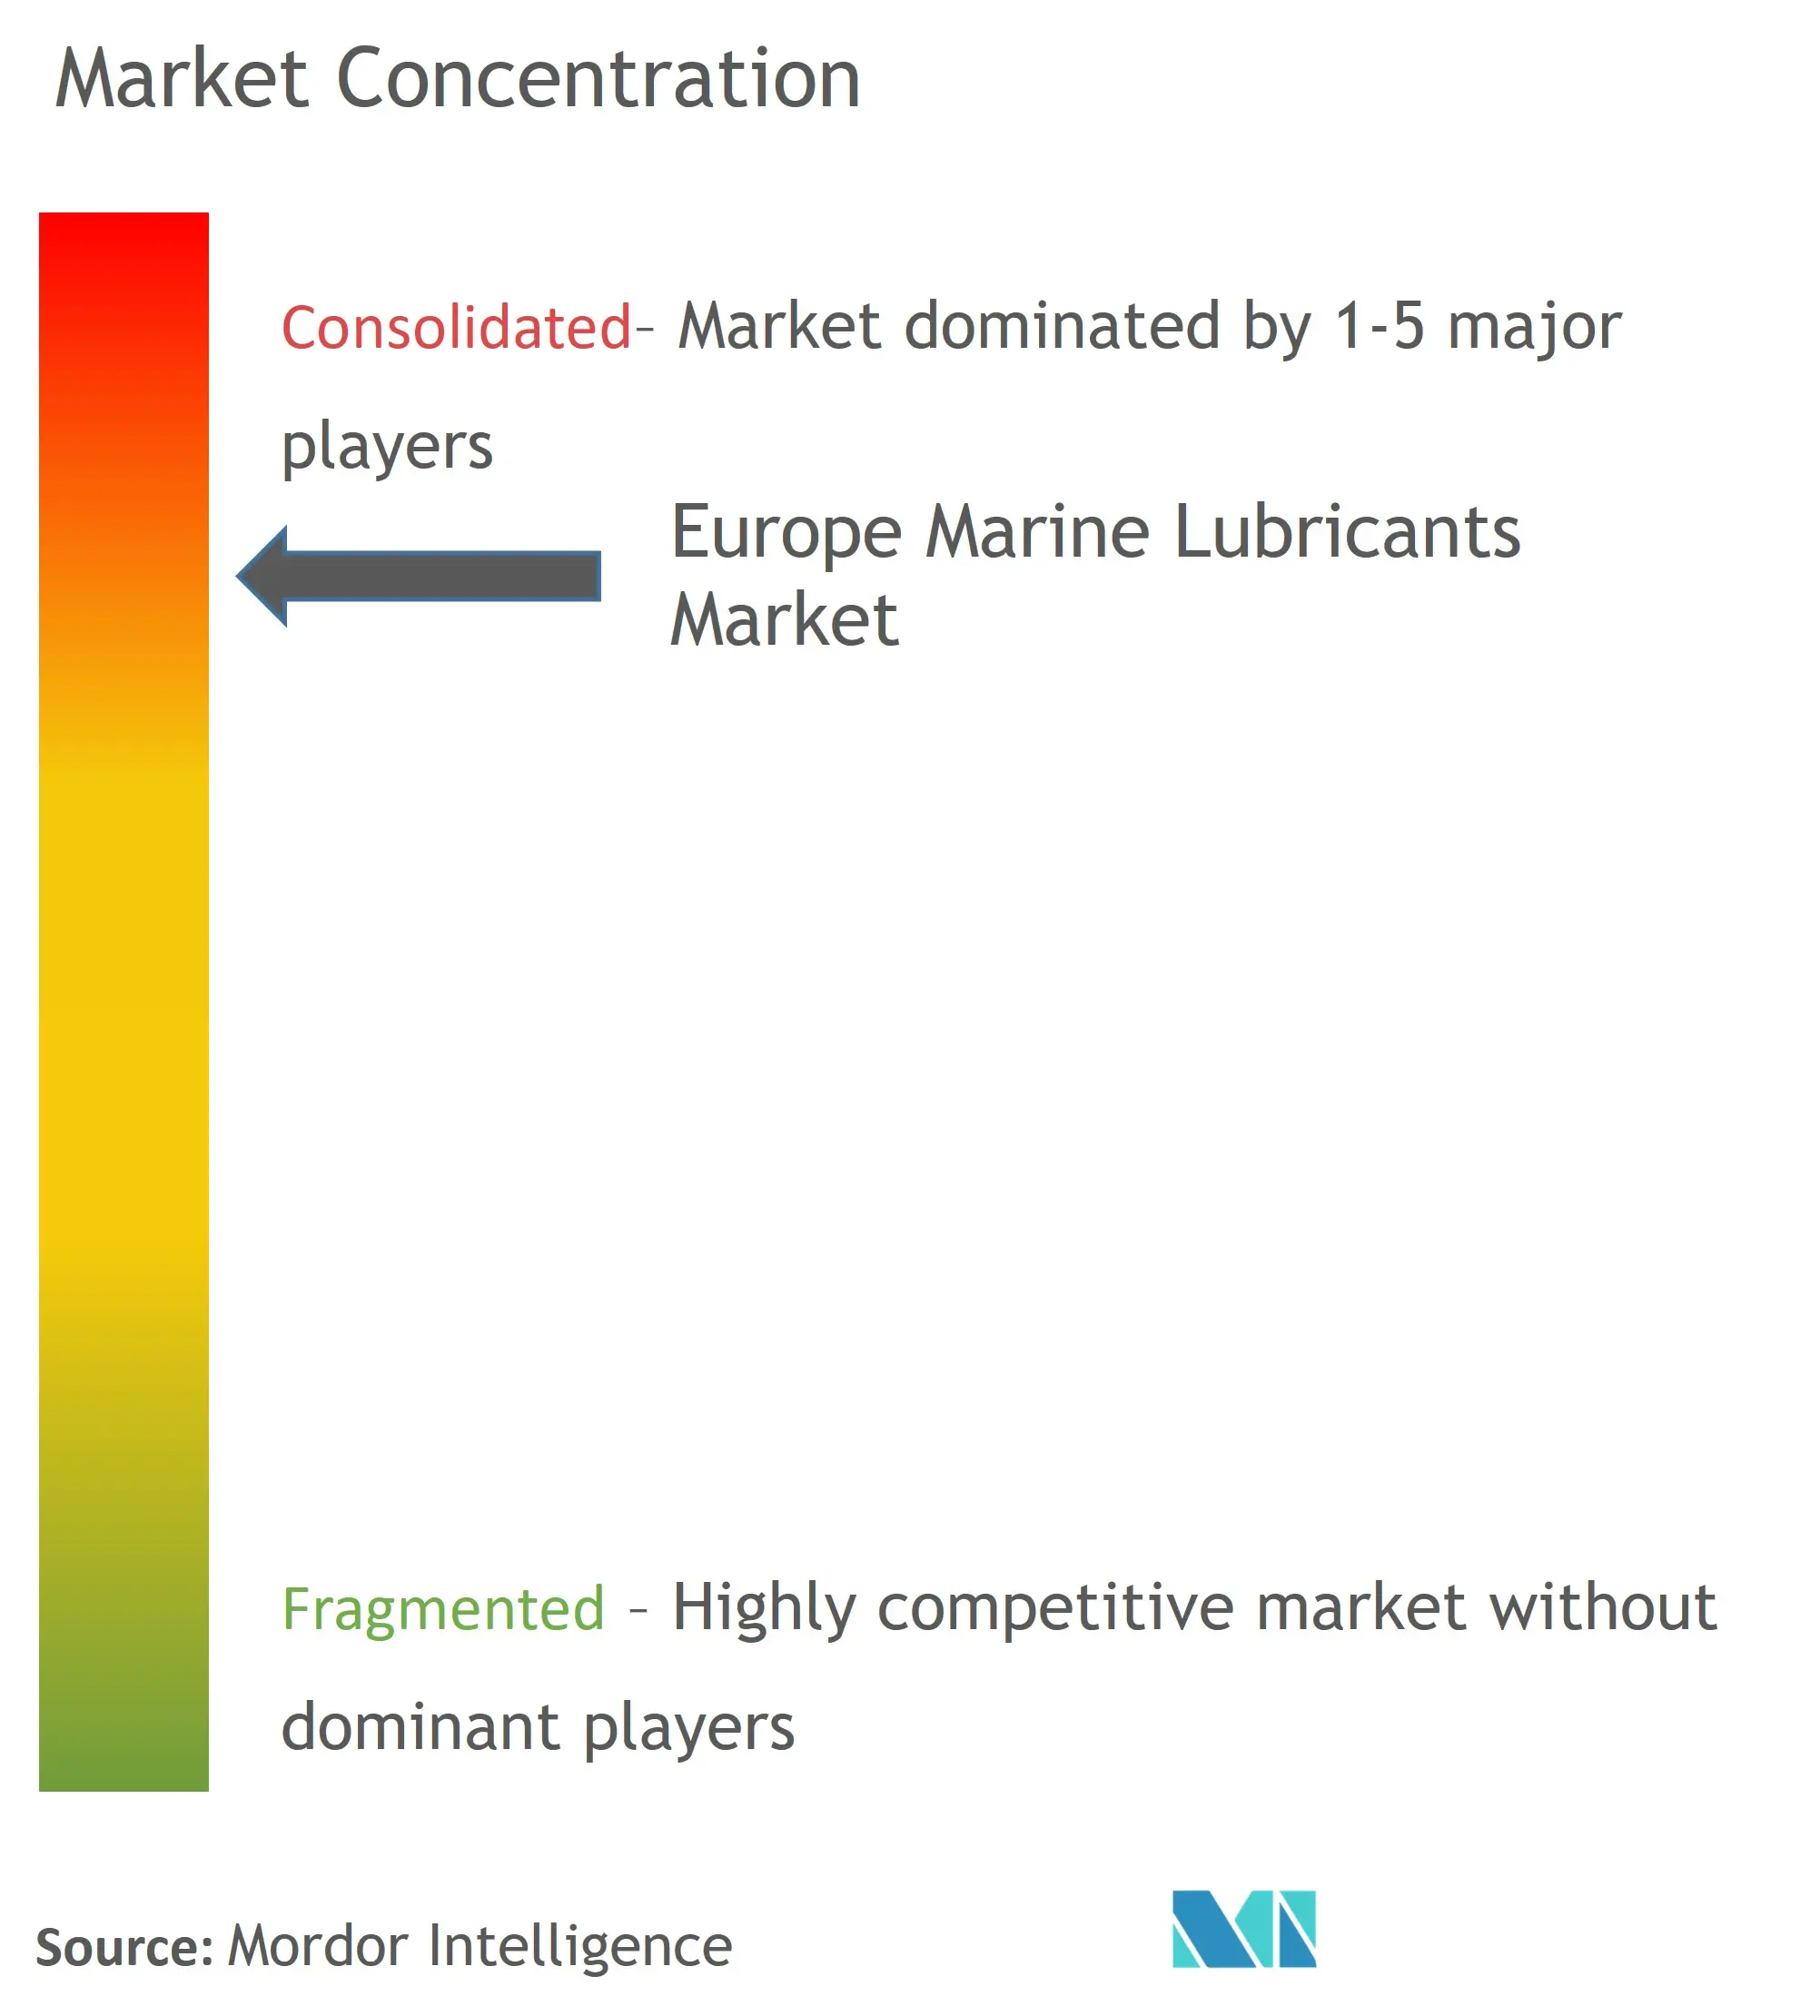 Europe Marine Lubricants Market Concentration